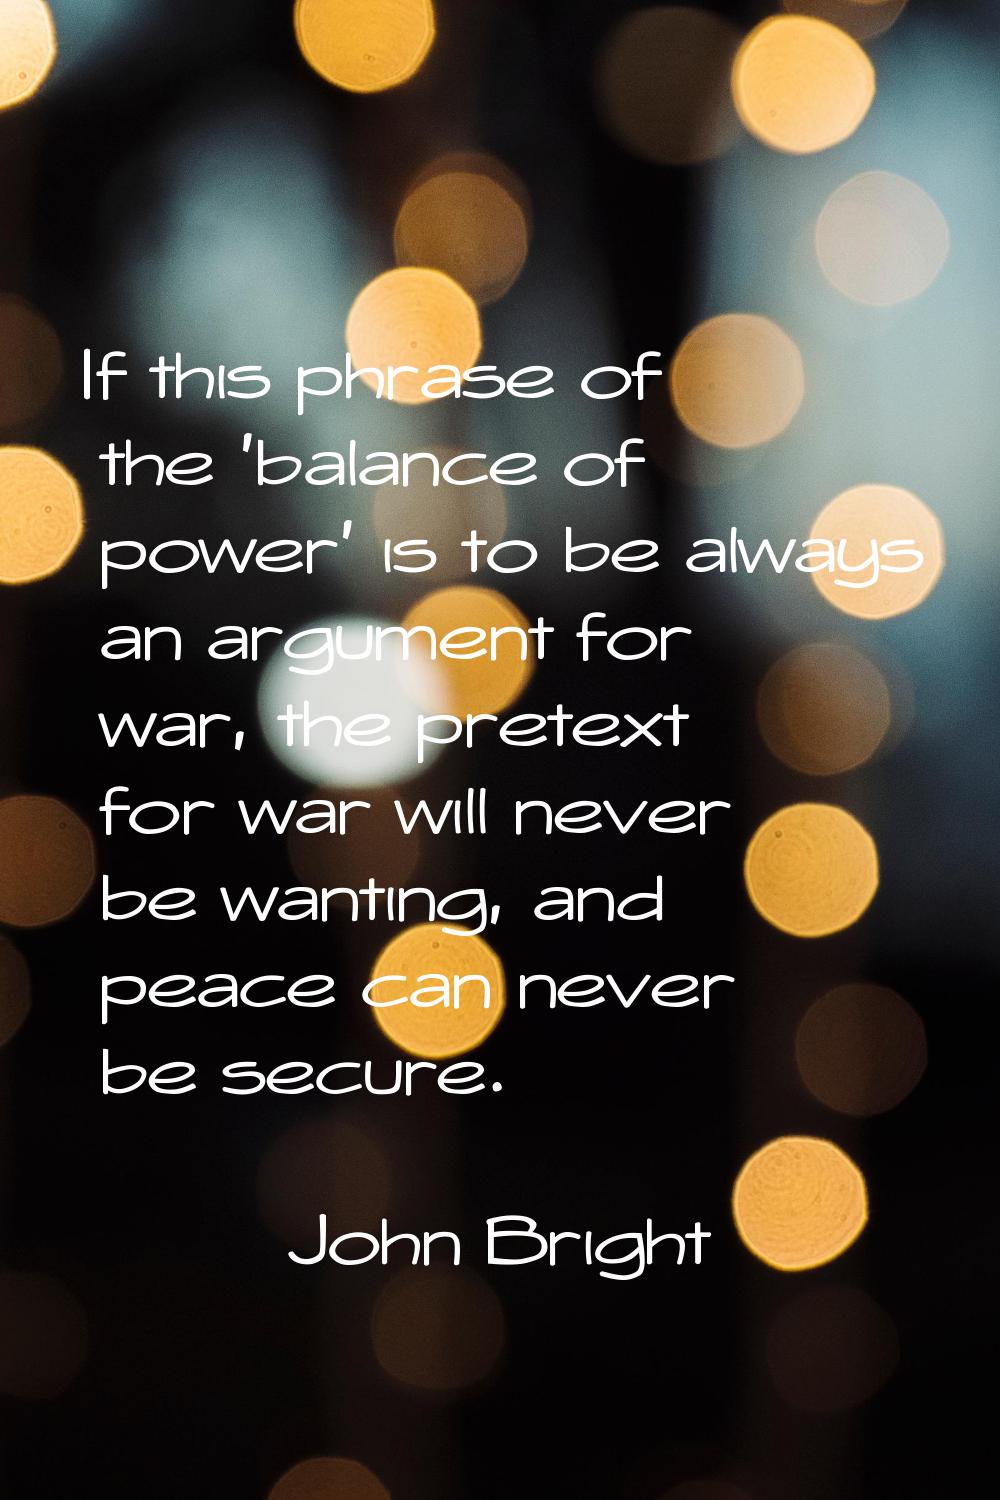 If this phrase of the 'balance of power' is to be always an argument for war, the pretext for war w